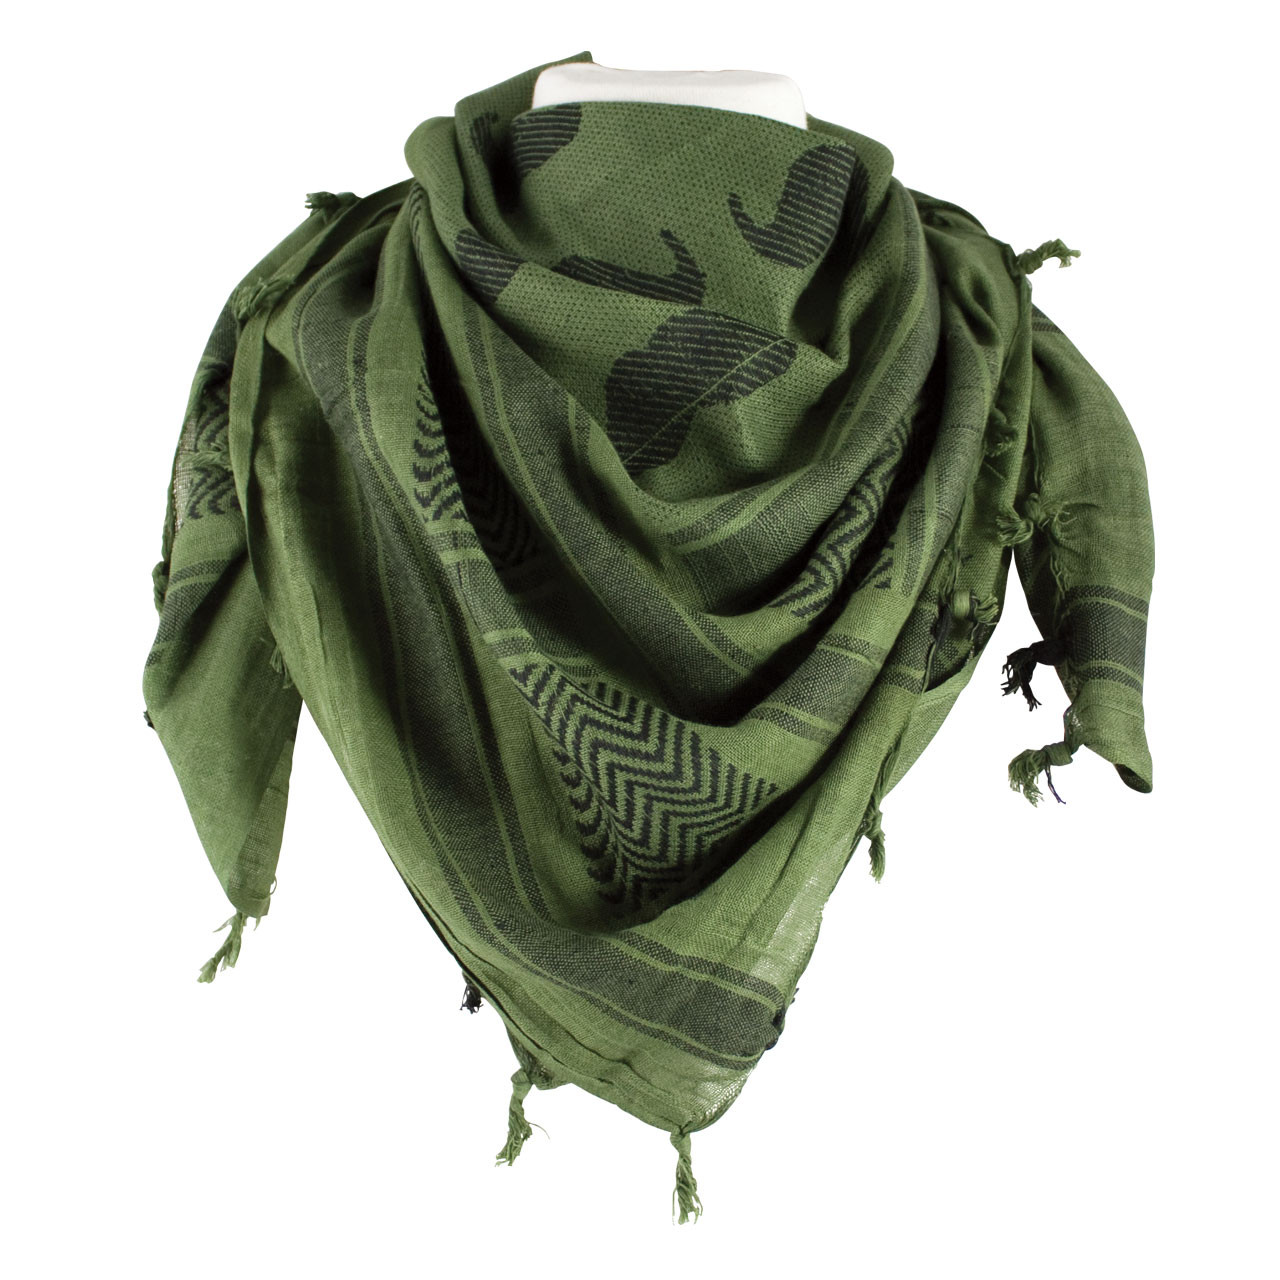 Shemagh Head Wraps - Tactical Headwear - Red Rock Outdoor Gear